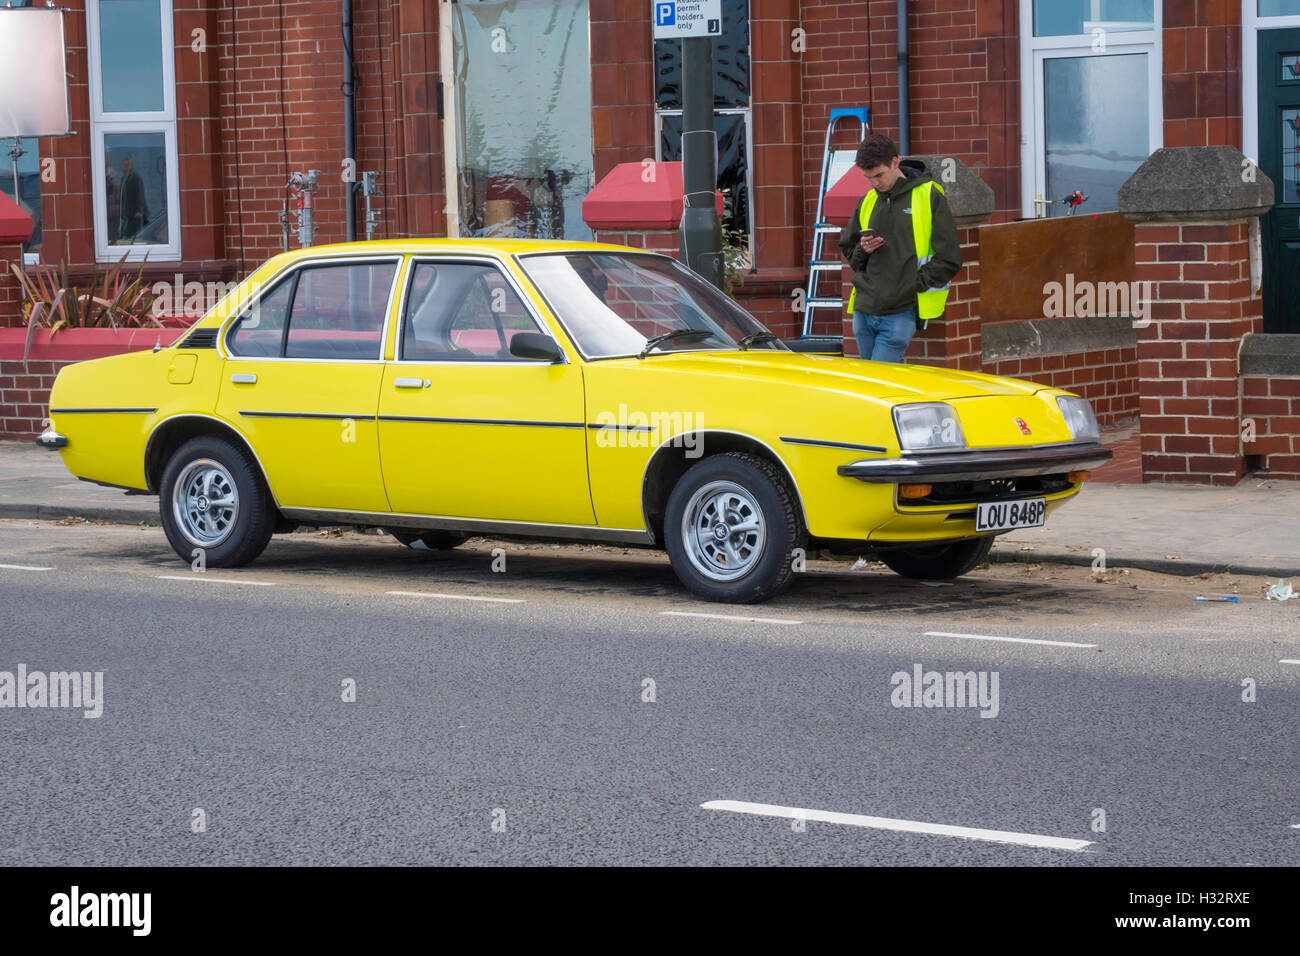 A yellow 1975 Vauxhall Cavalier car used in filming Making Noise Quietly in Redcar Cleveland North Yorkshire UK Stock Photo